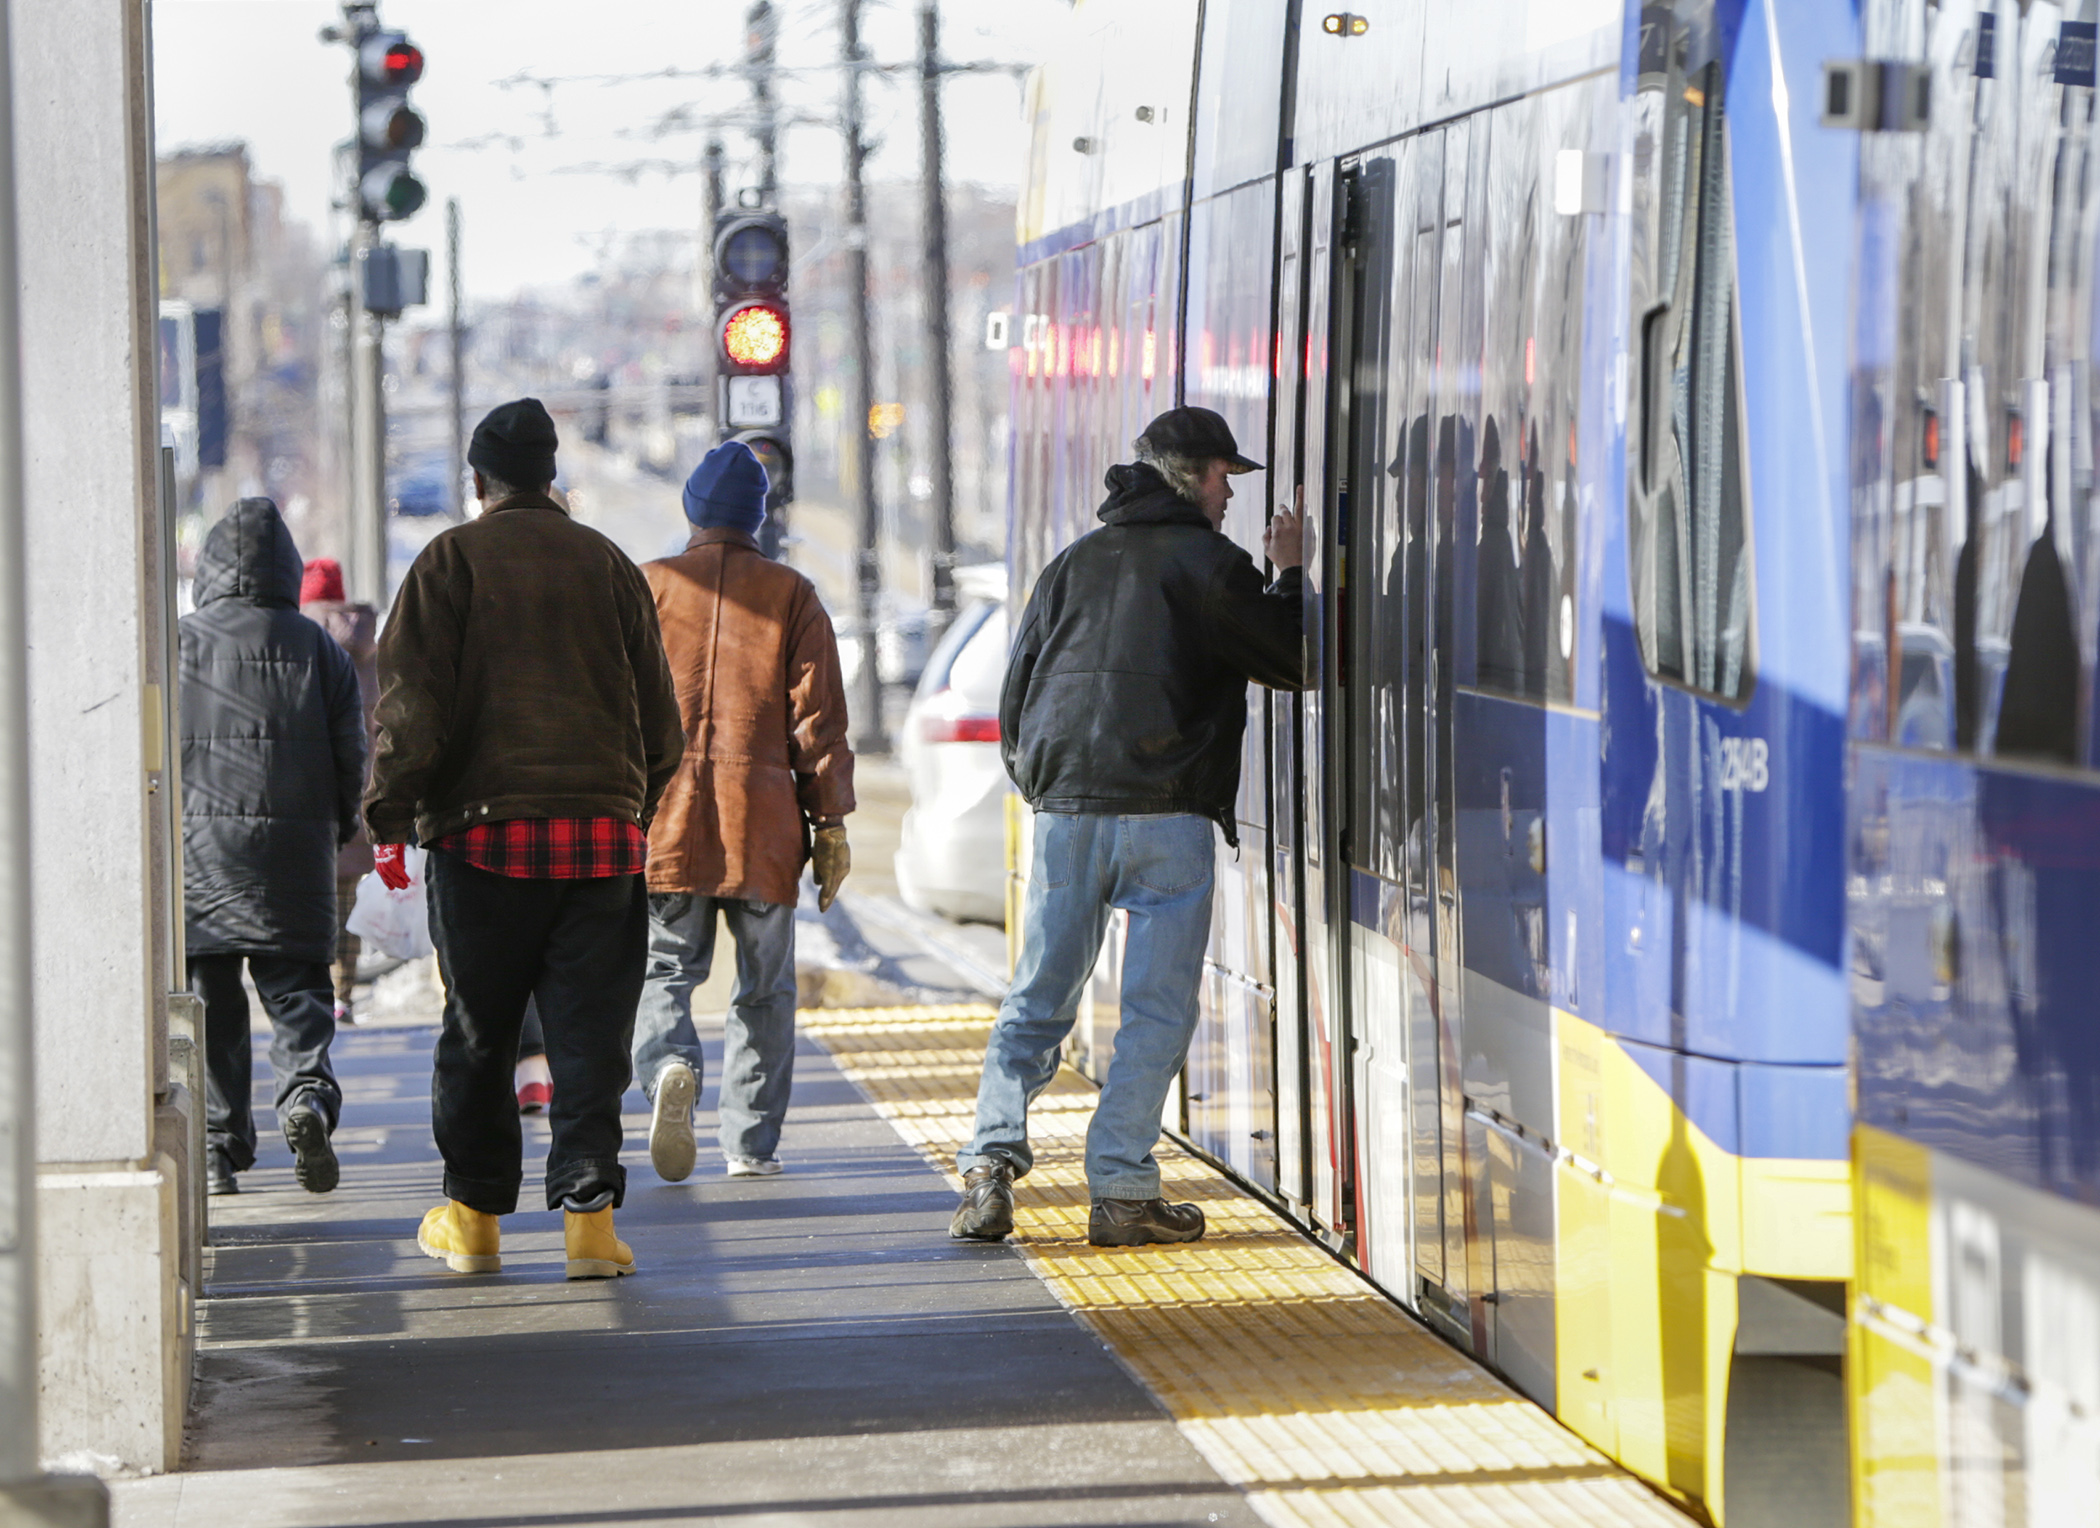 Metro Transit light rail riders exit an eastbound train at the State Capitol station Feb. 5. Lawmakers say ensuring security on Metro Transit light rail trains is a priority this session. Photo by Paul Battaglia